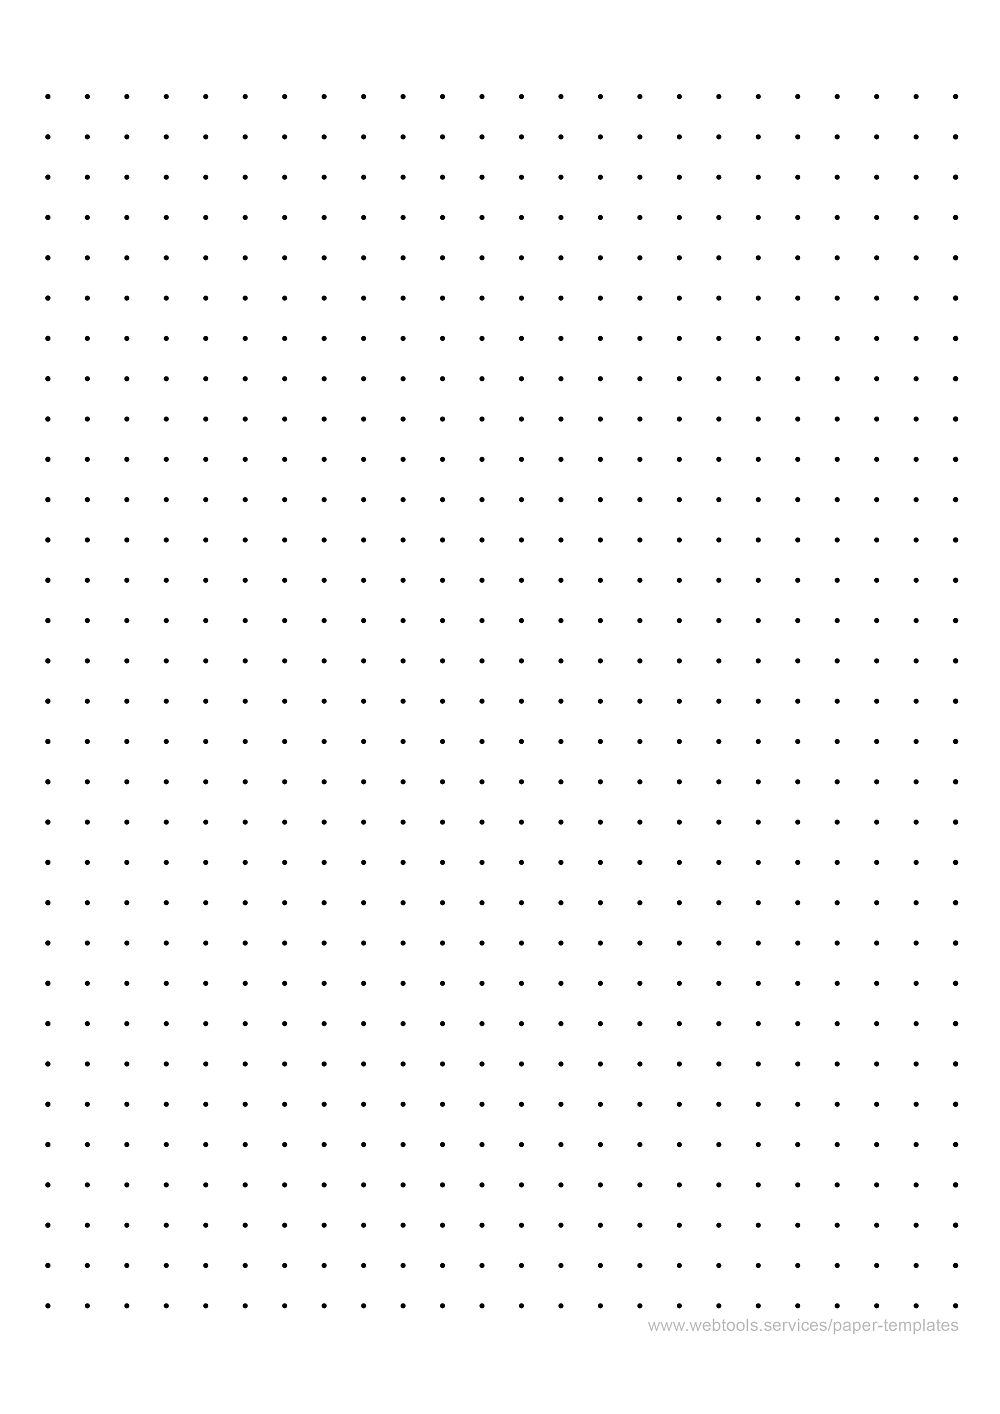 dot paper with three dots per inch